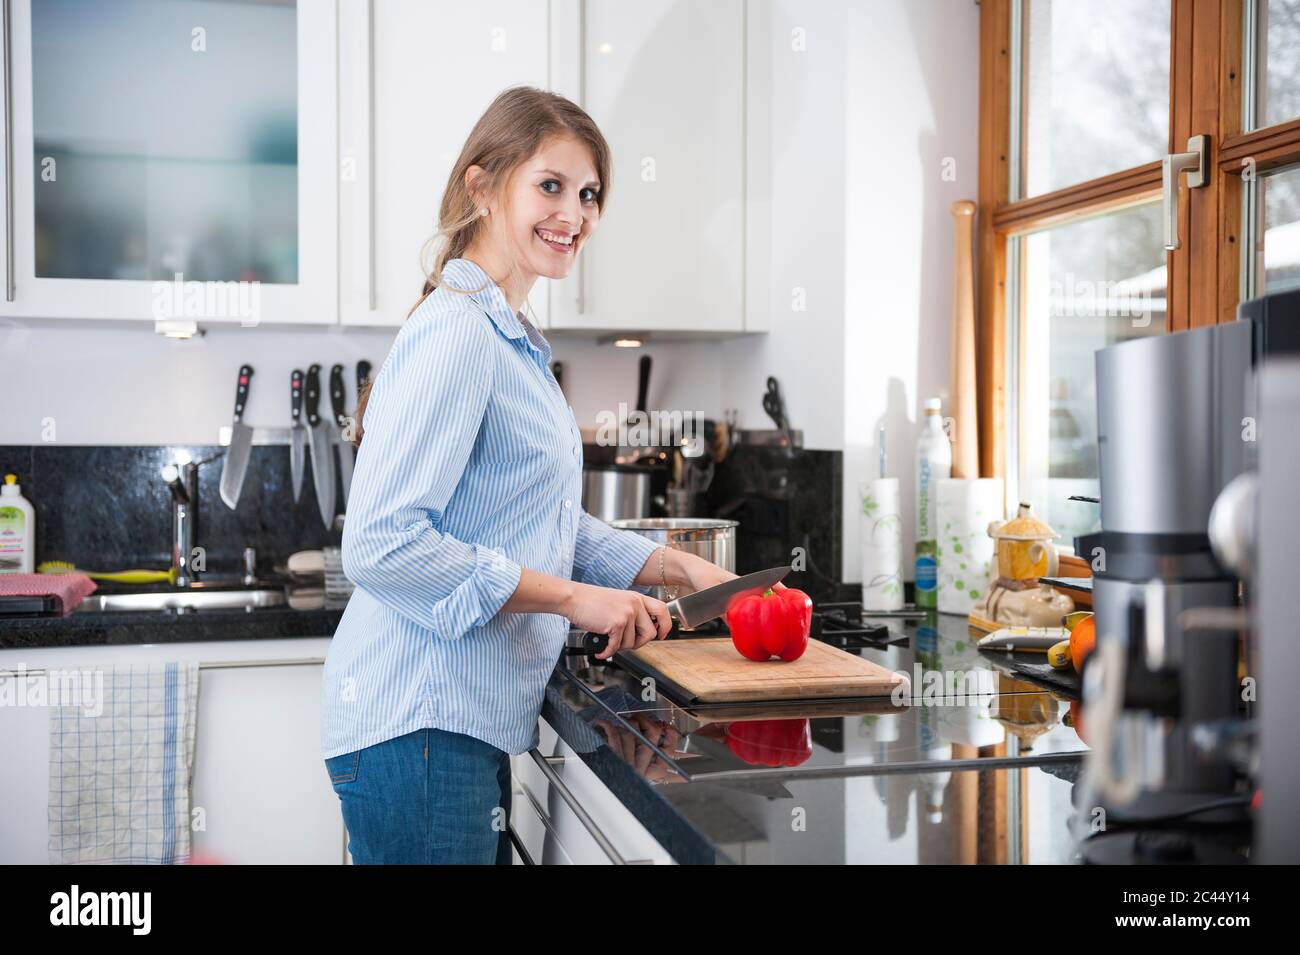 Smiling beautiful woman cutting red bell pepper at kitchen counter Stock Photo